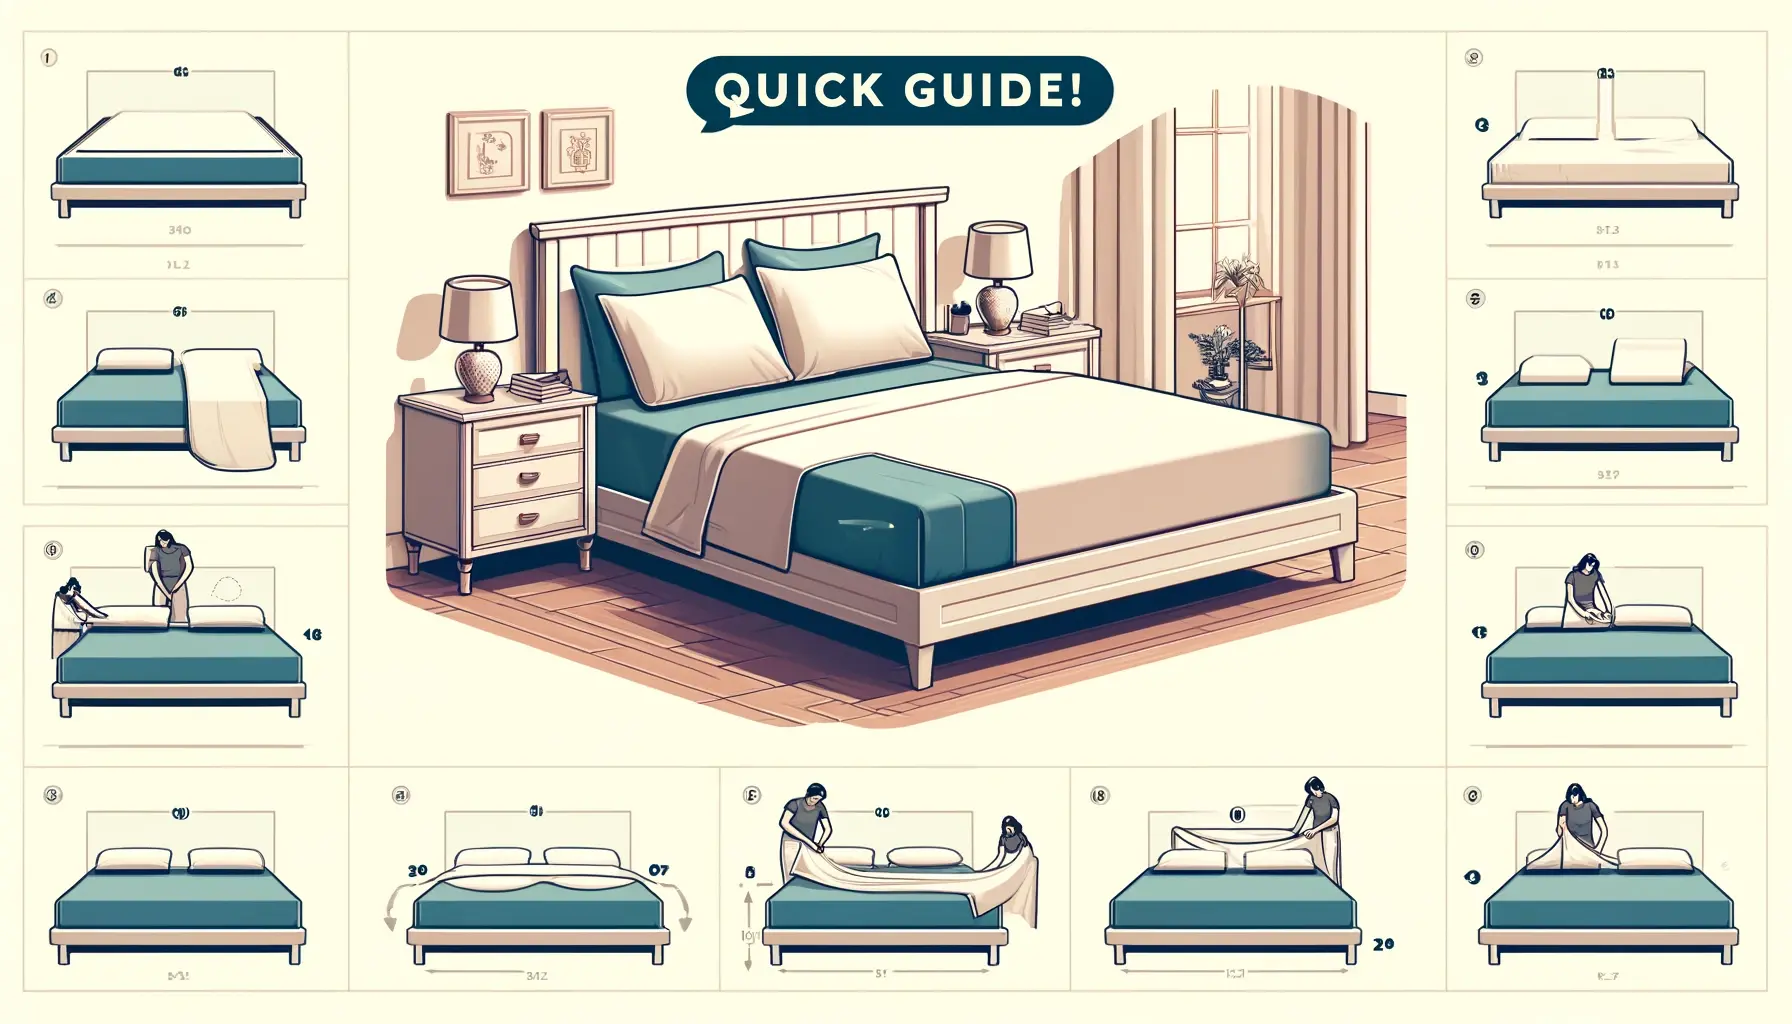 How to Use Queen Sized Sheets